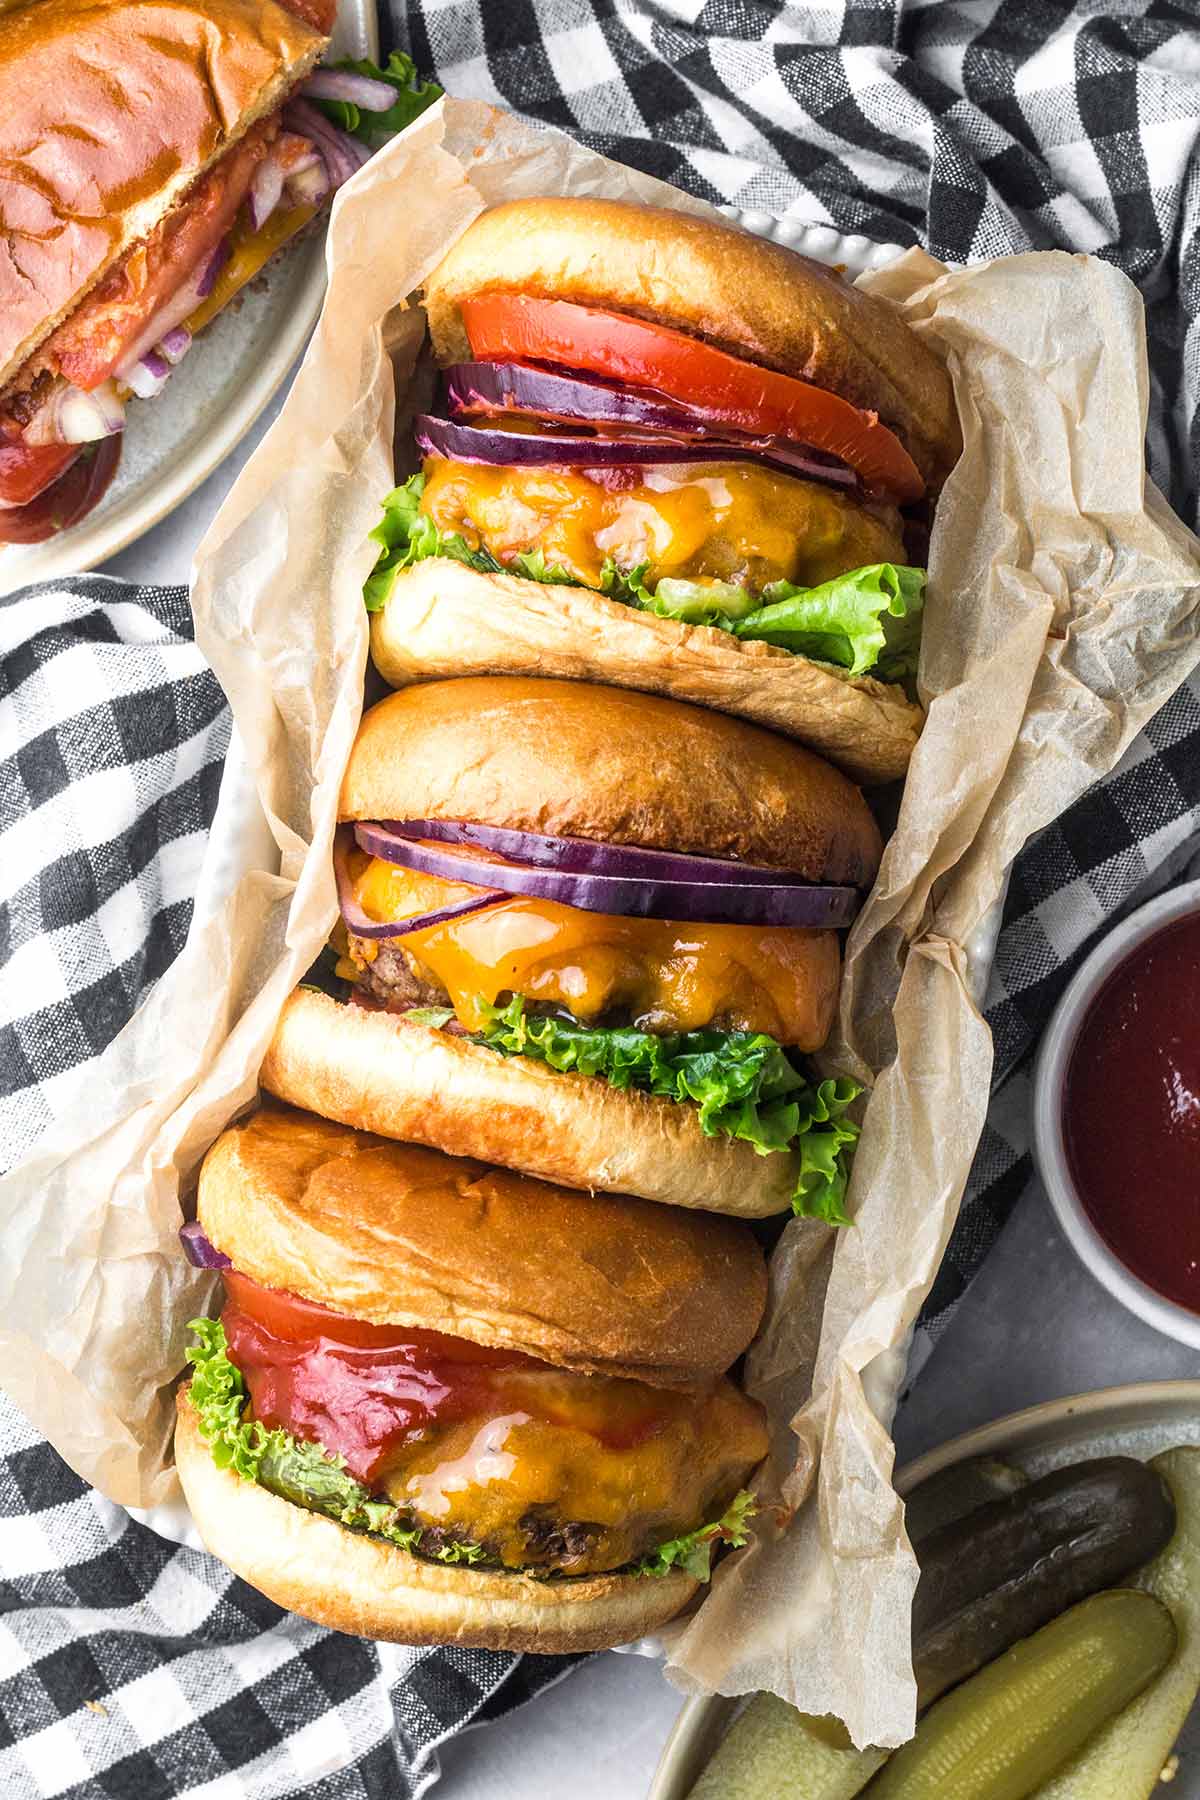 Three cheeseburgers with lettuce, tomato and onion. 